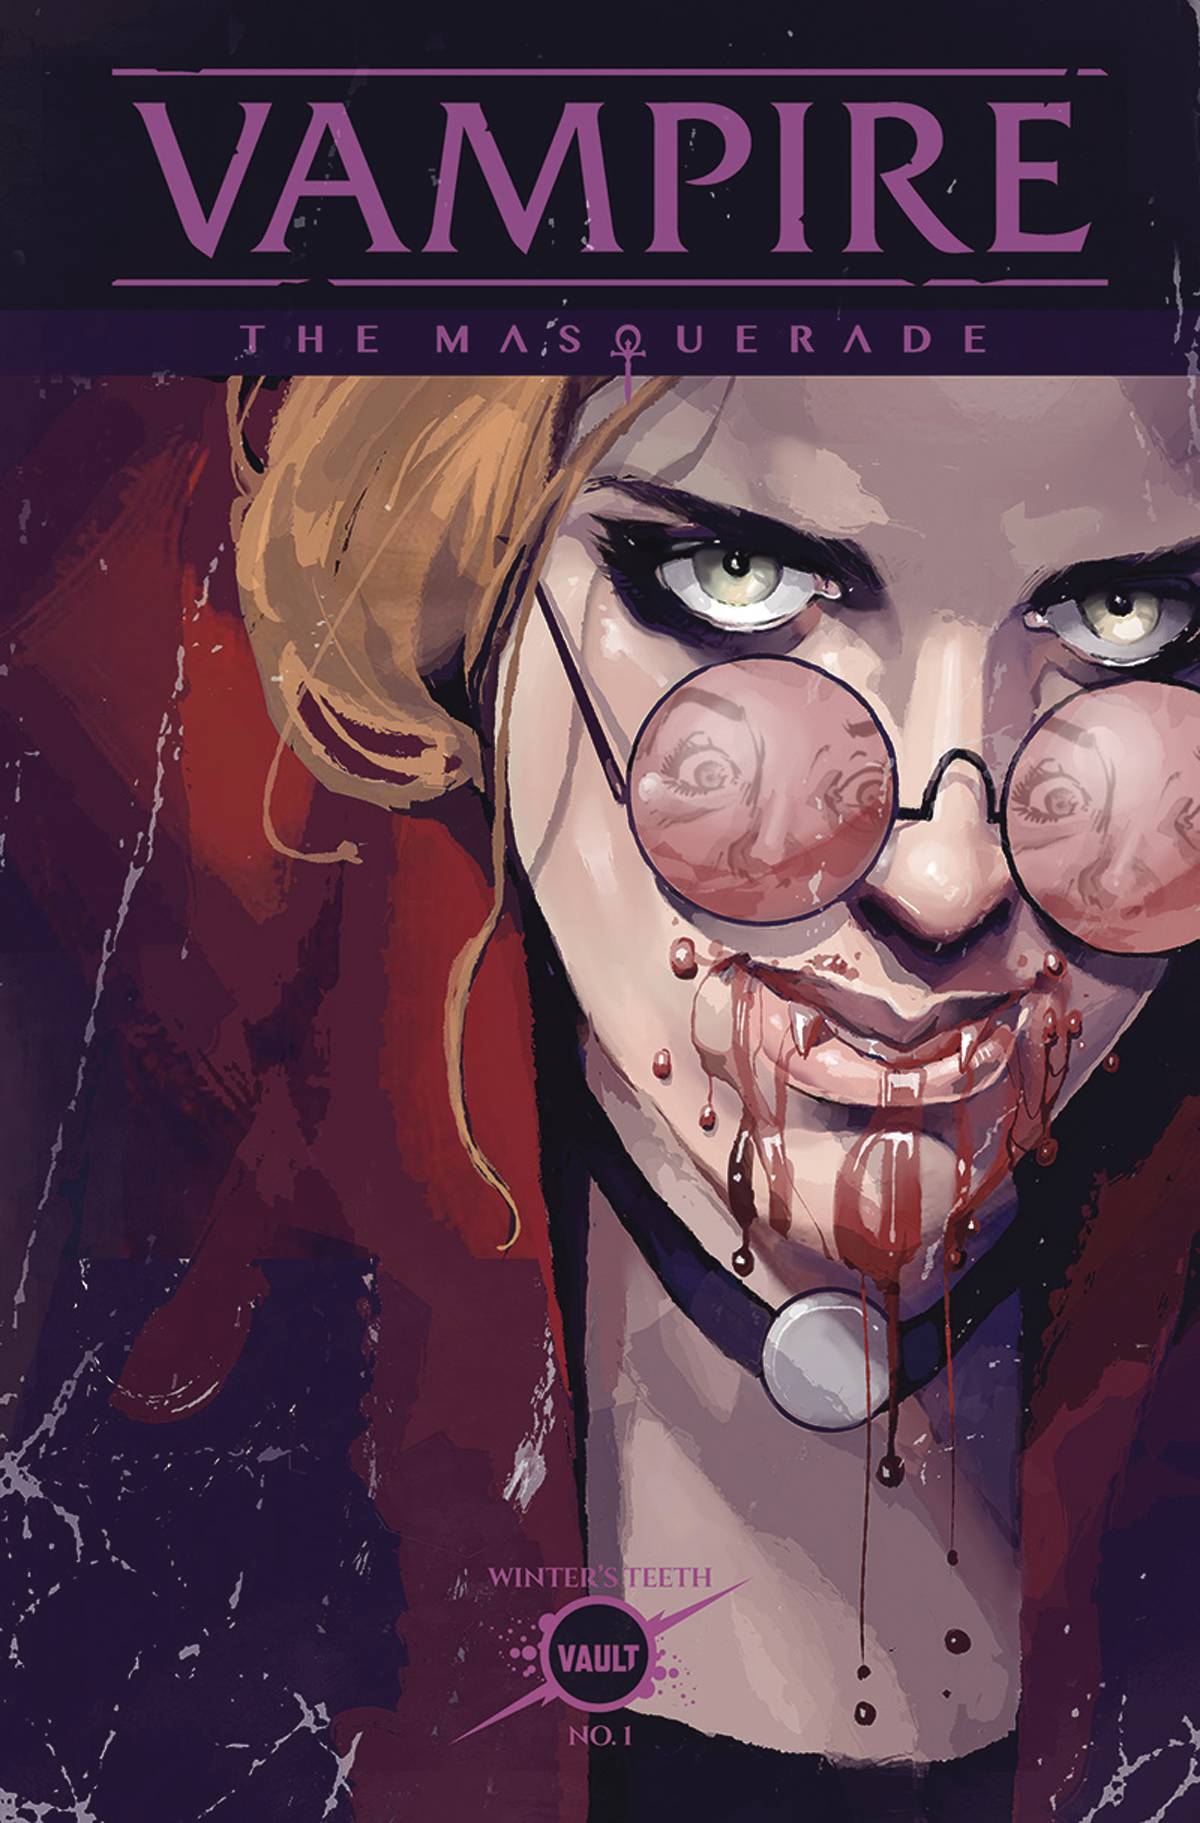 Vampire: The Masquerade — Winter's Teeth, Vol. 1 by Tim Seeley